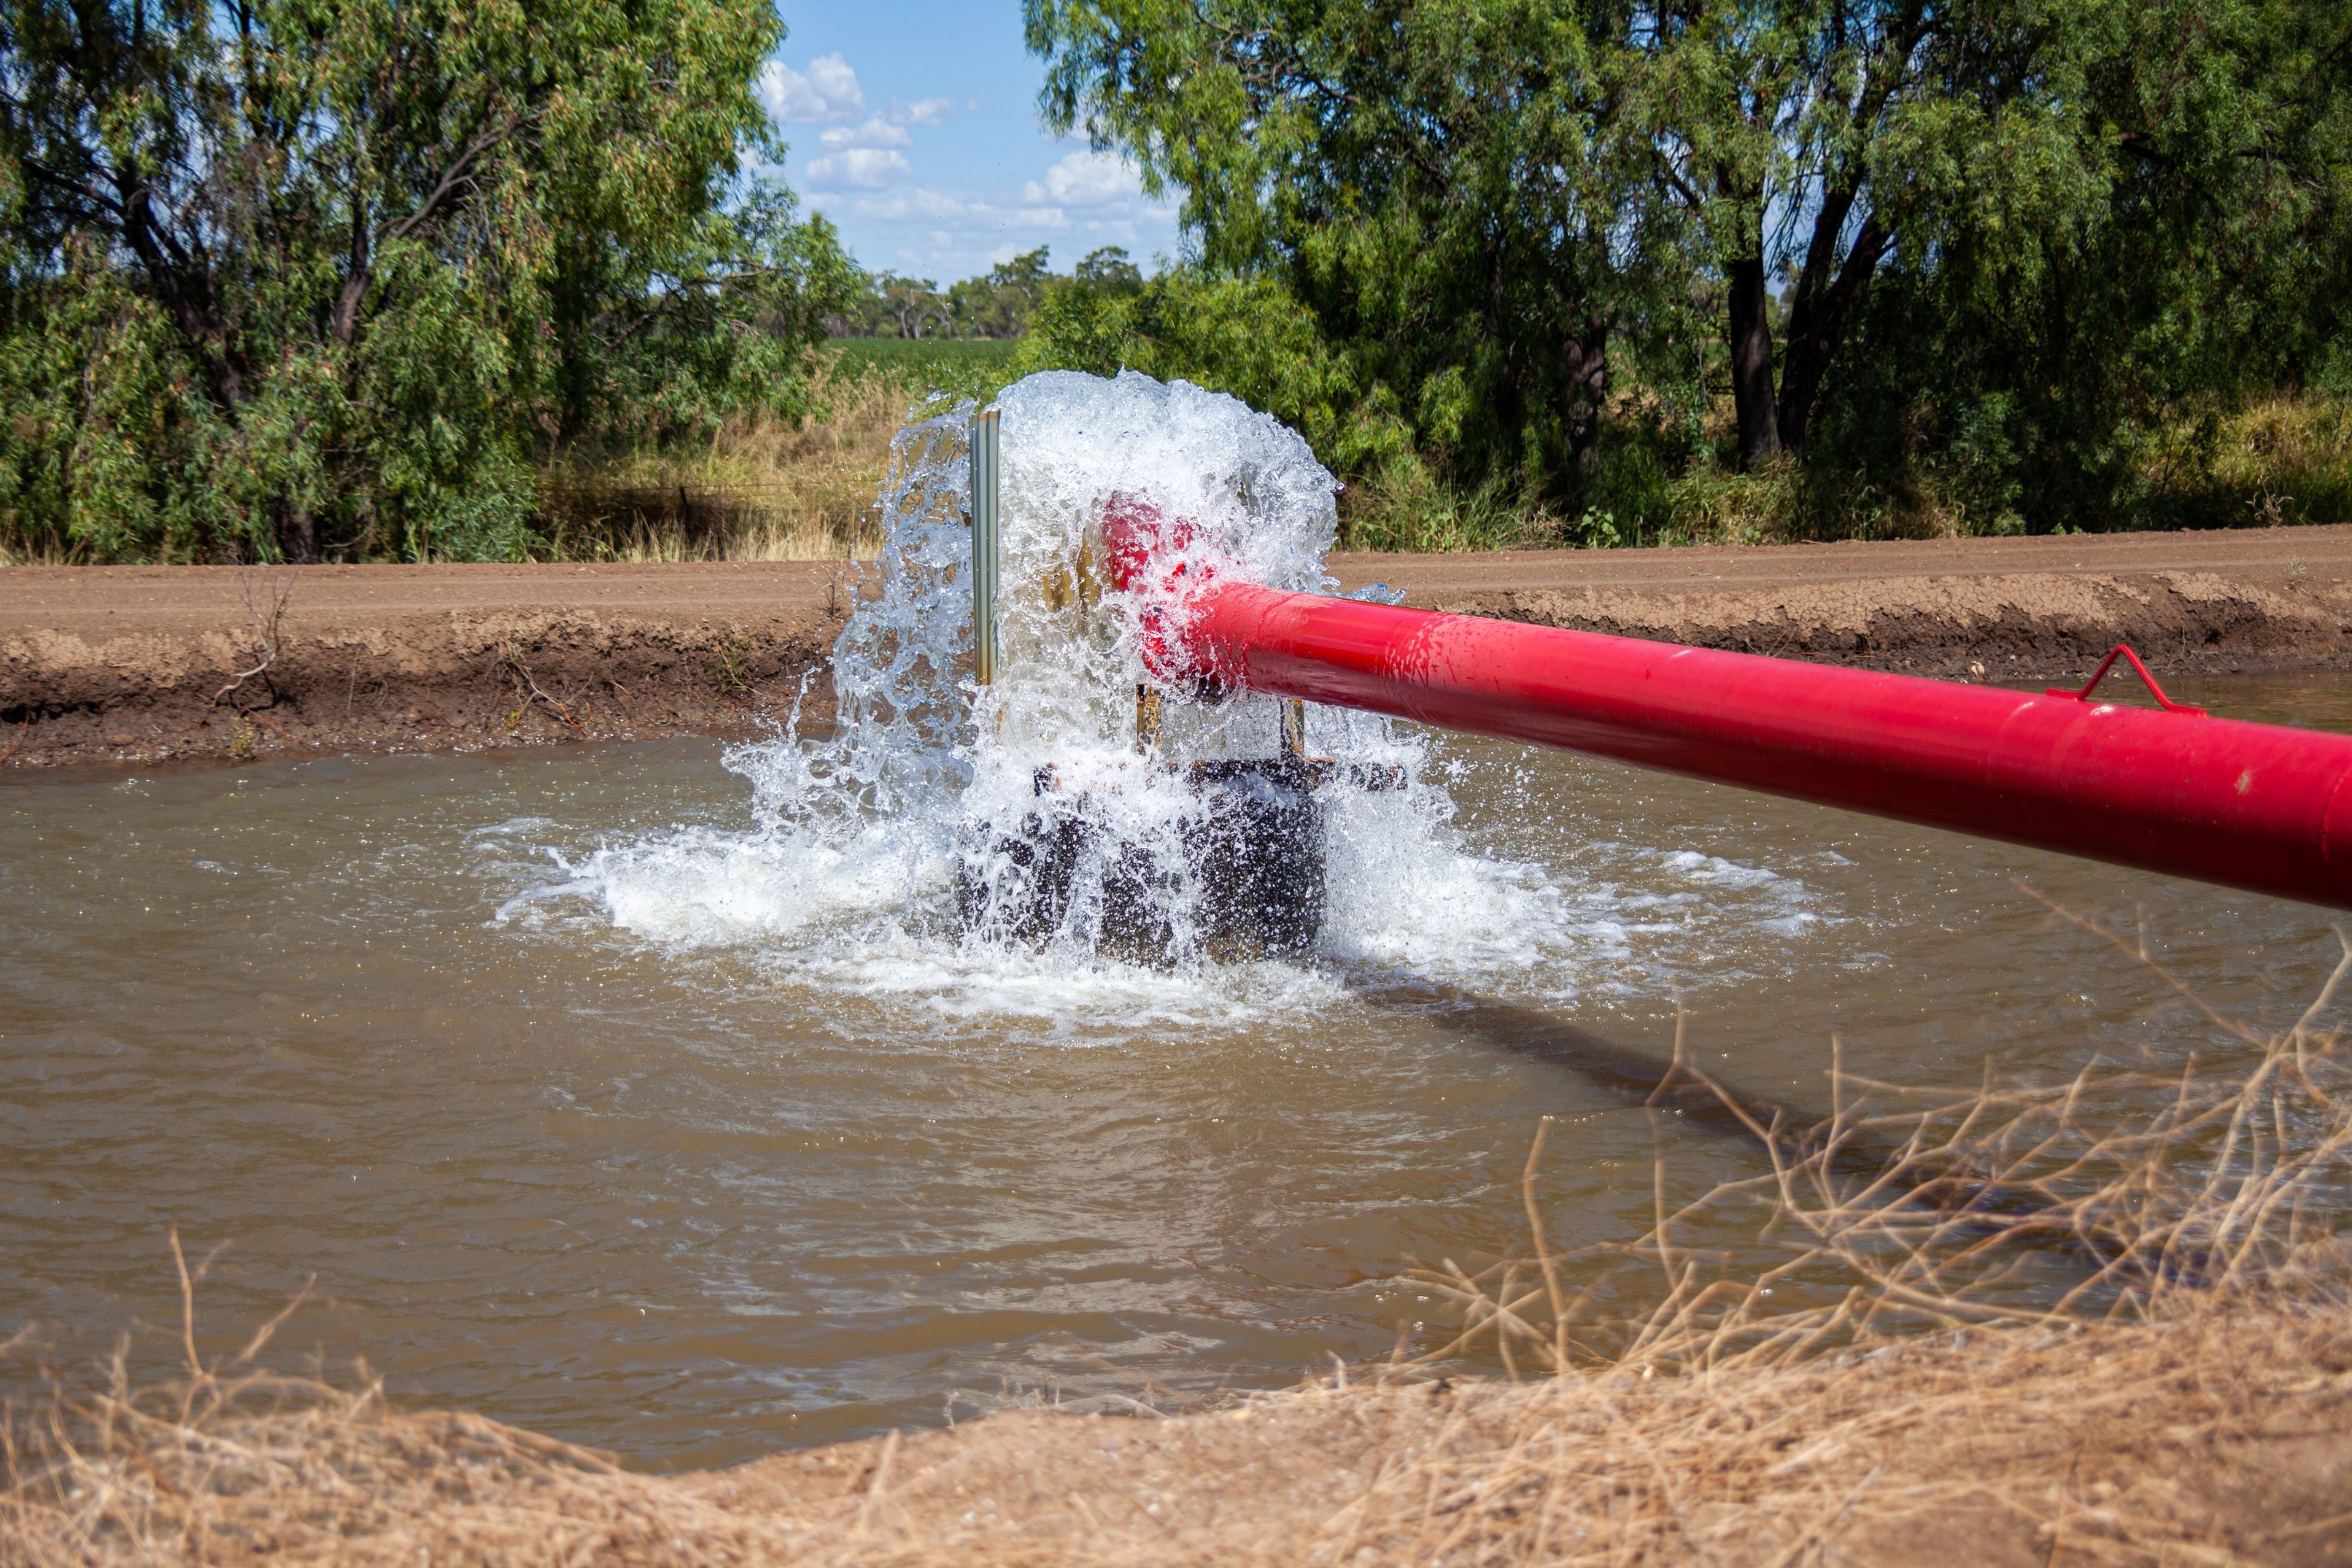 Bore filling an irrigation channel